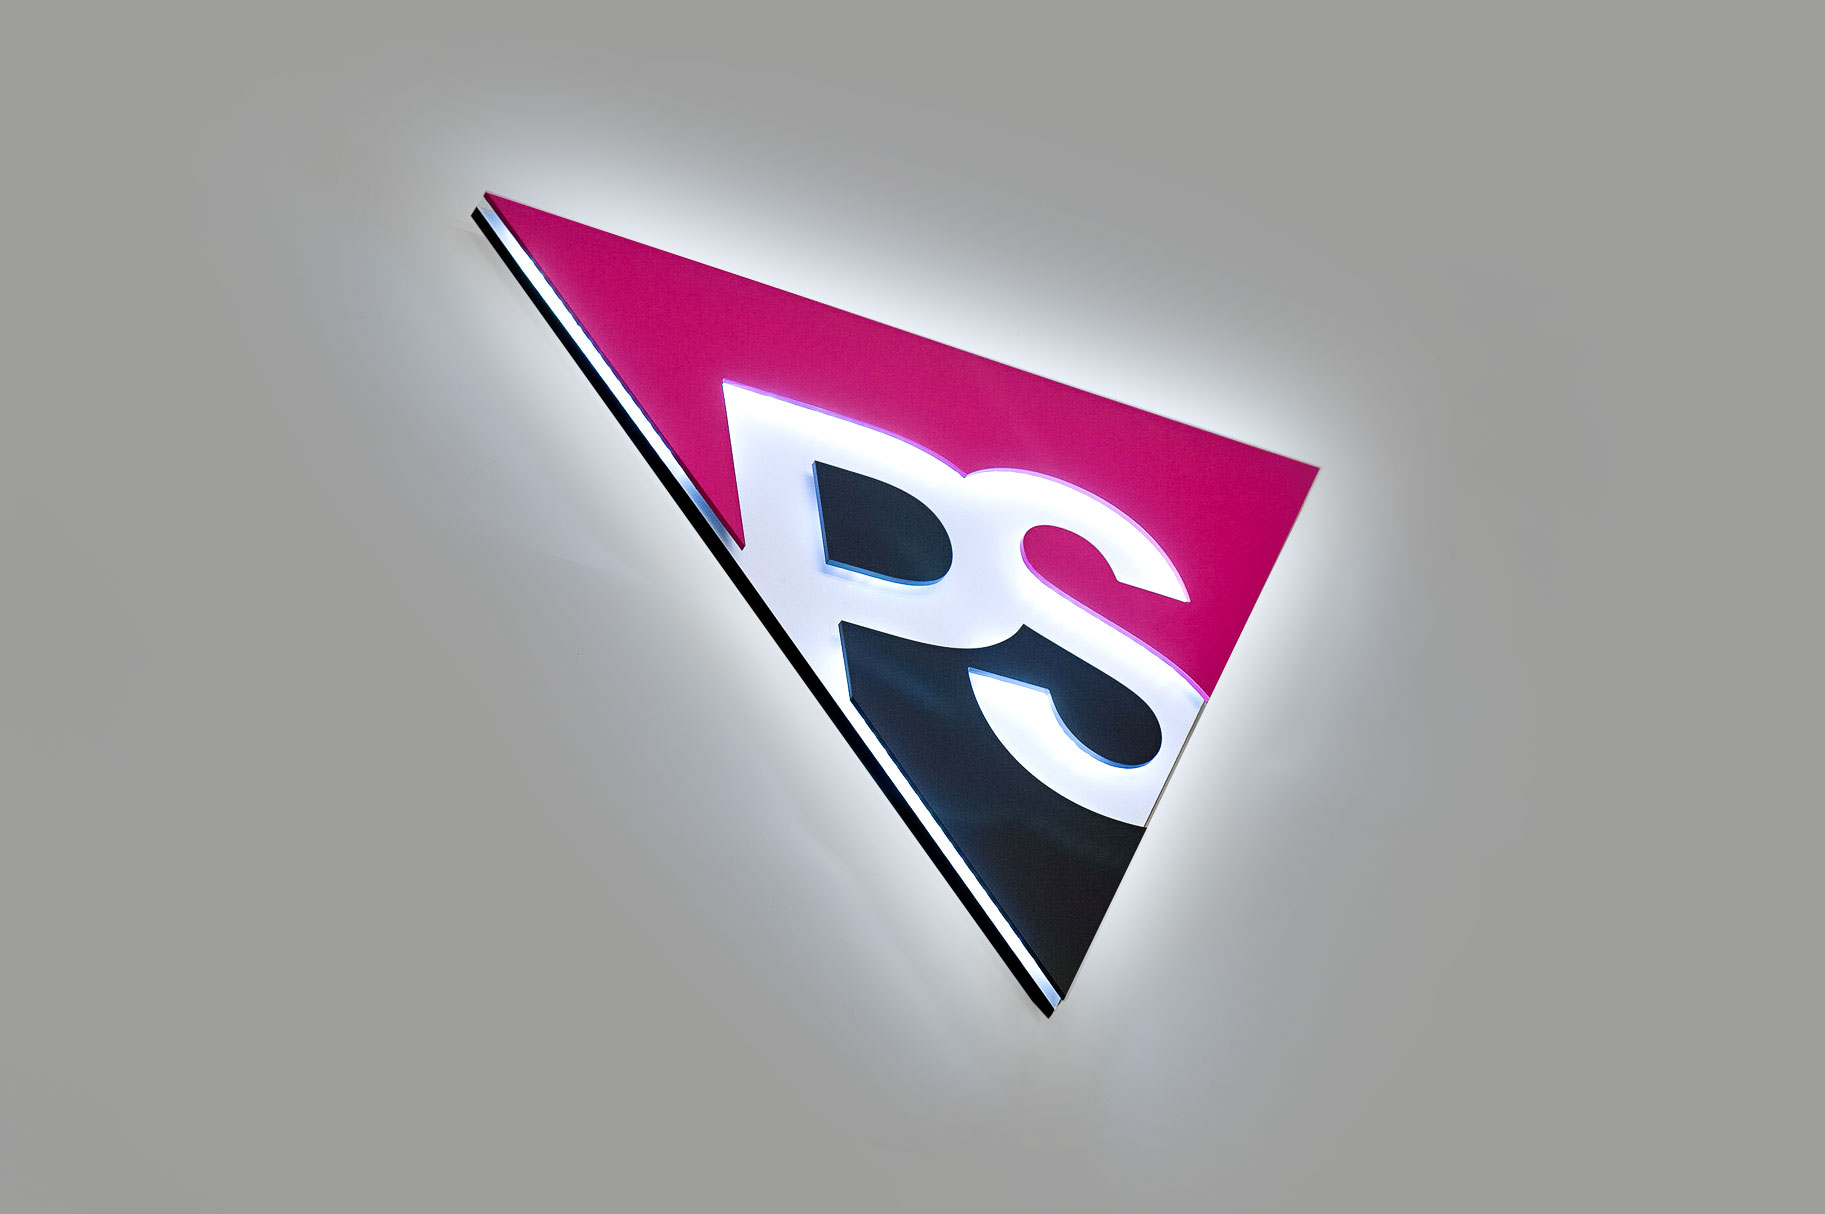 Illuminated pink and grey entrance sign for Peer Seattle, a gay and lesbian organization in Seattle, Washington